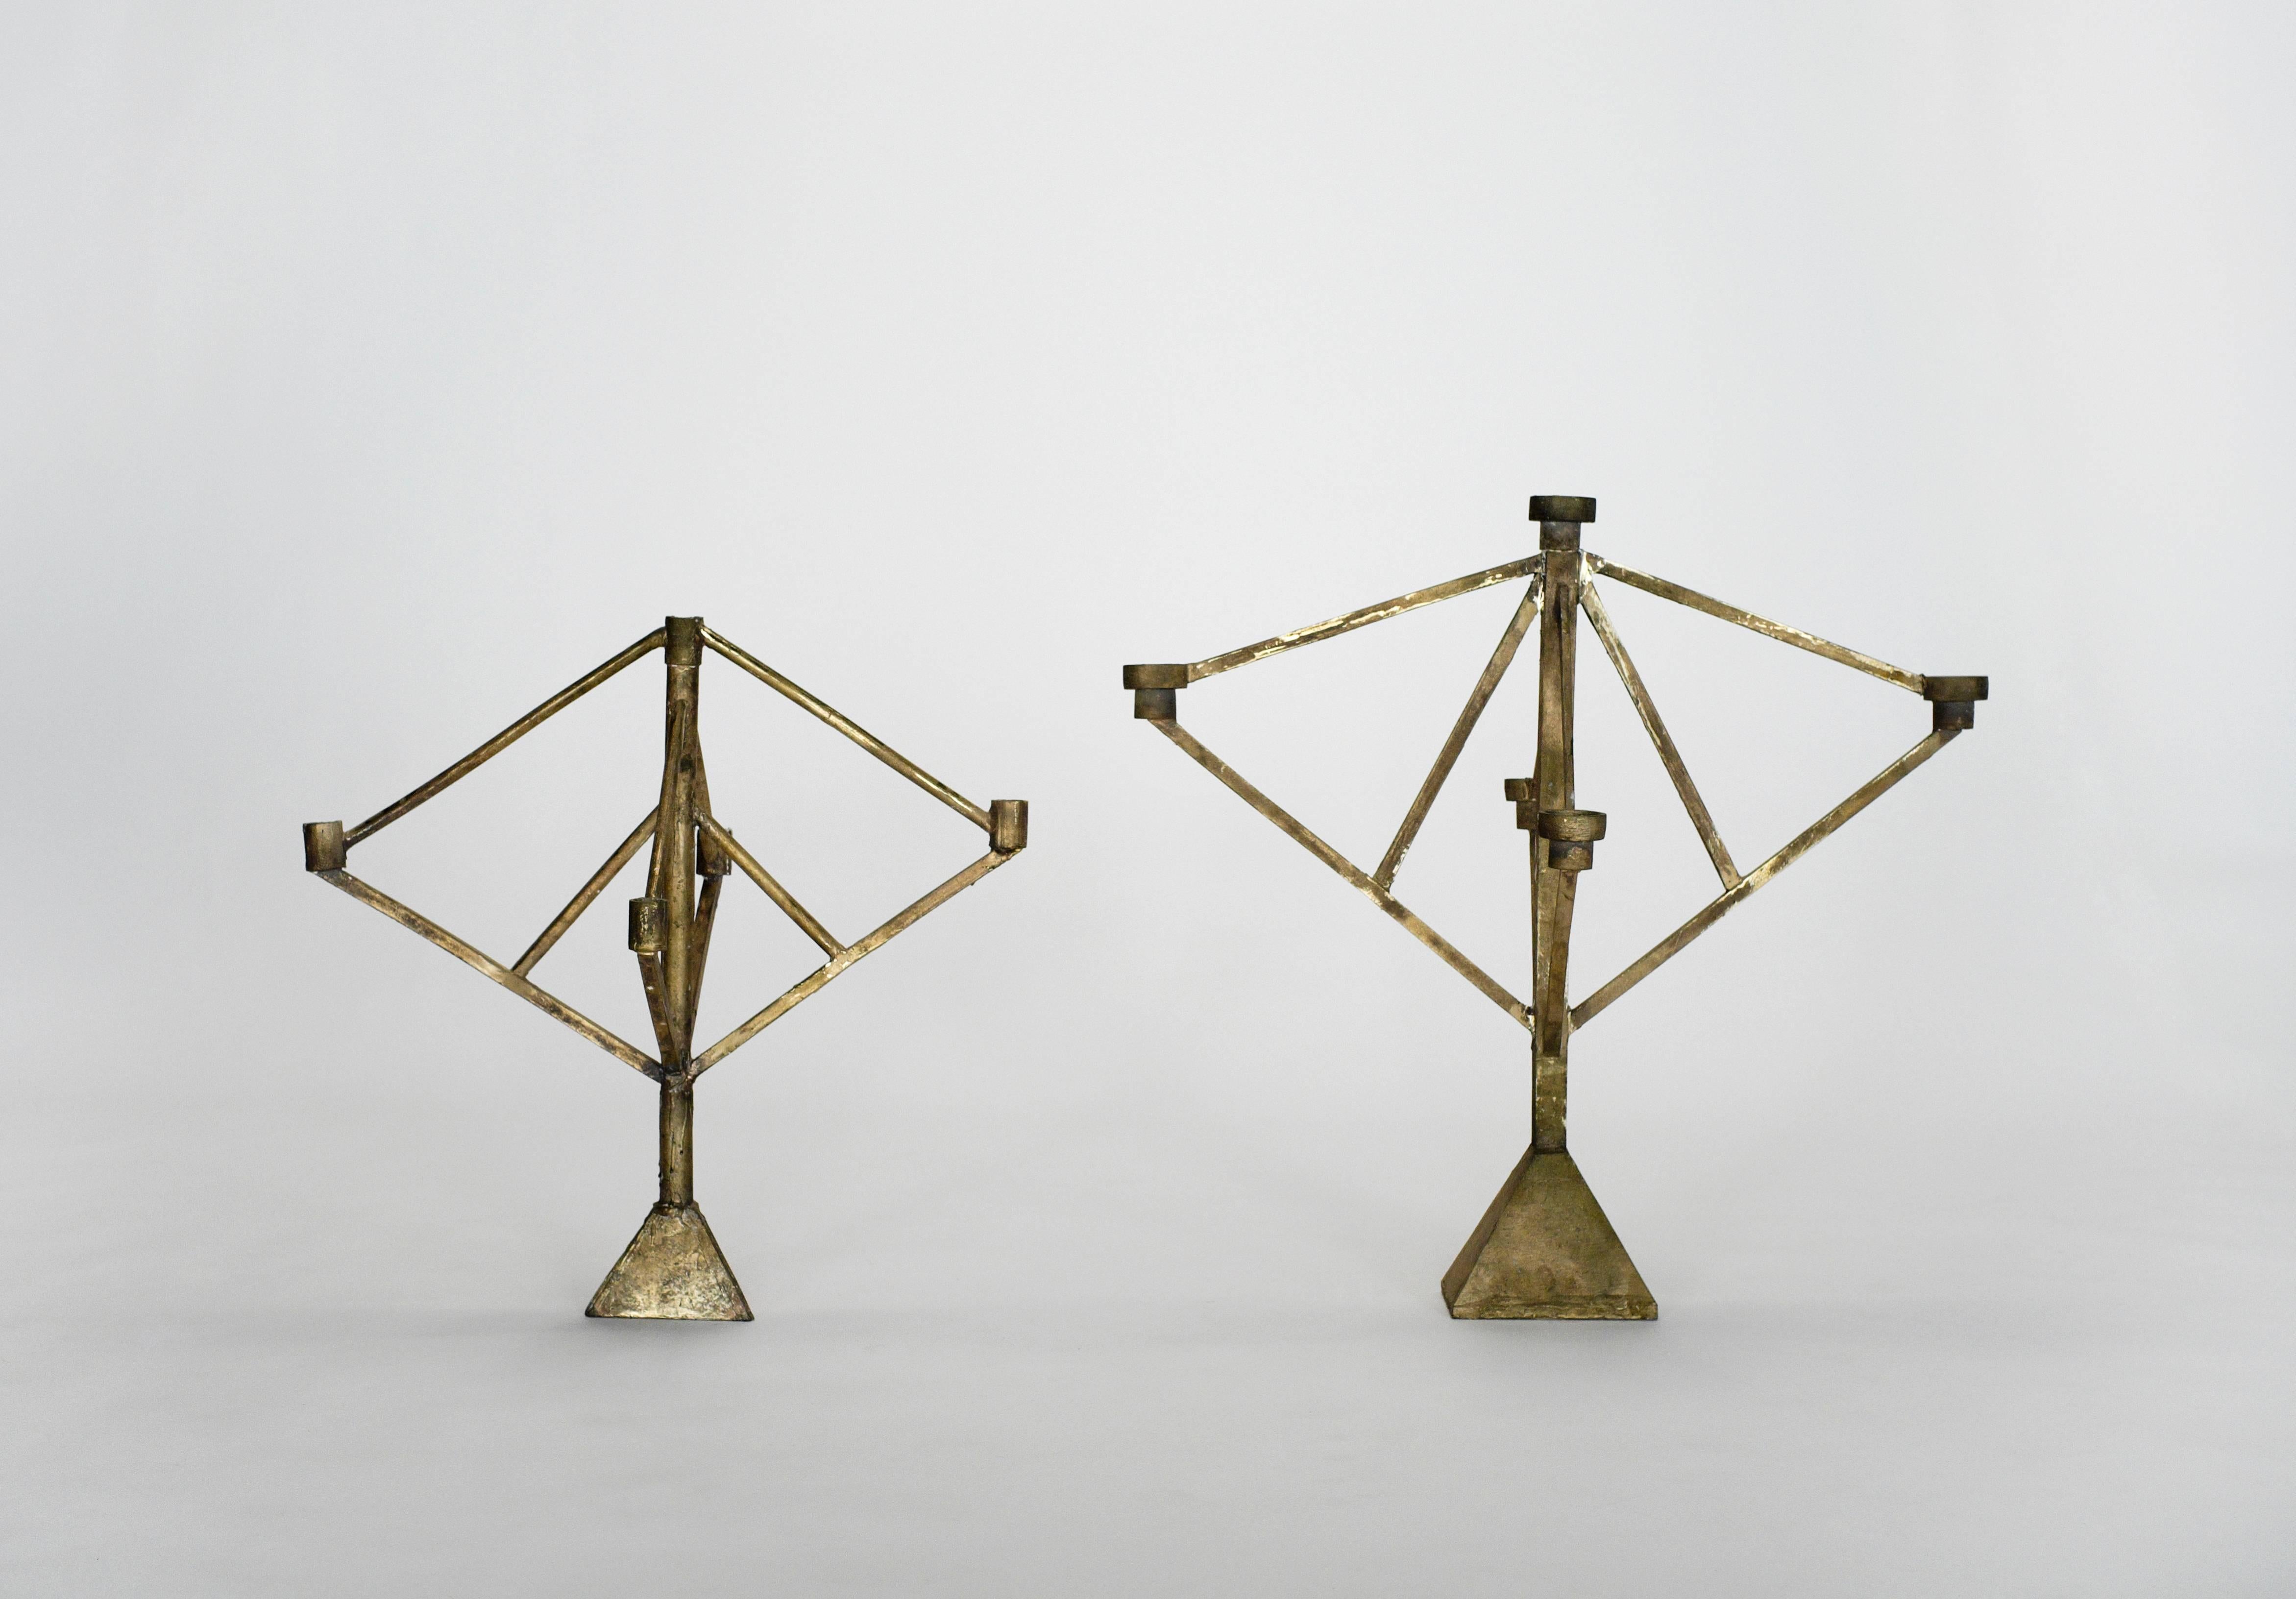 The Sprue candelabra is cast bronze with 2-5 candleholders depending on the size. The textures within the wax during the casting process translate perfectly into the bronze material, so the castings are left intentionally raw, allowing the surface